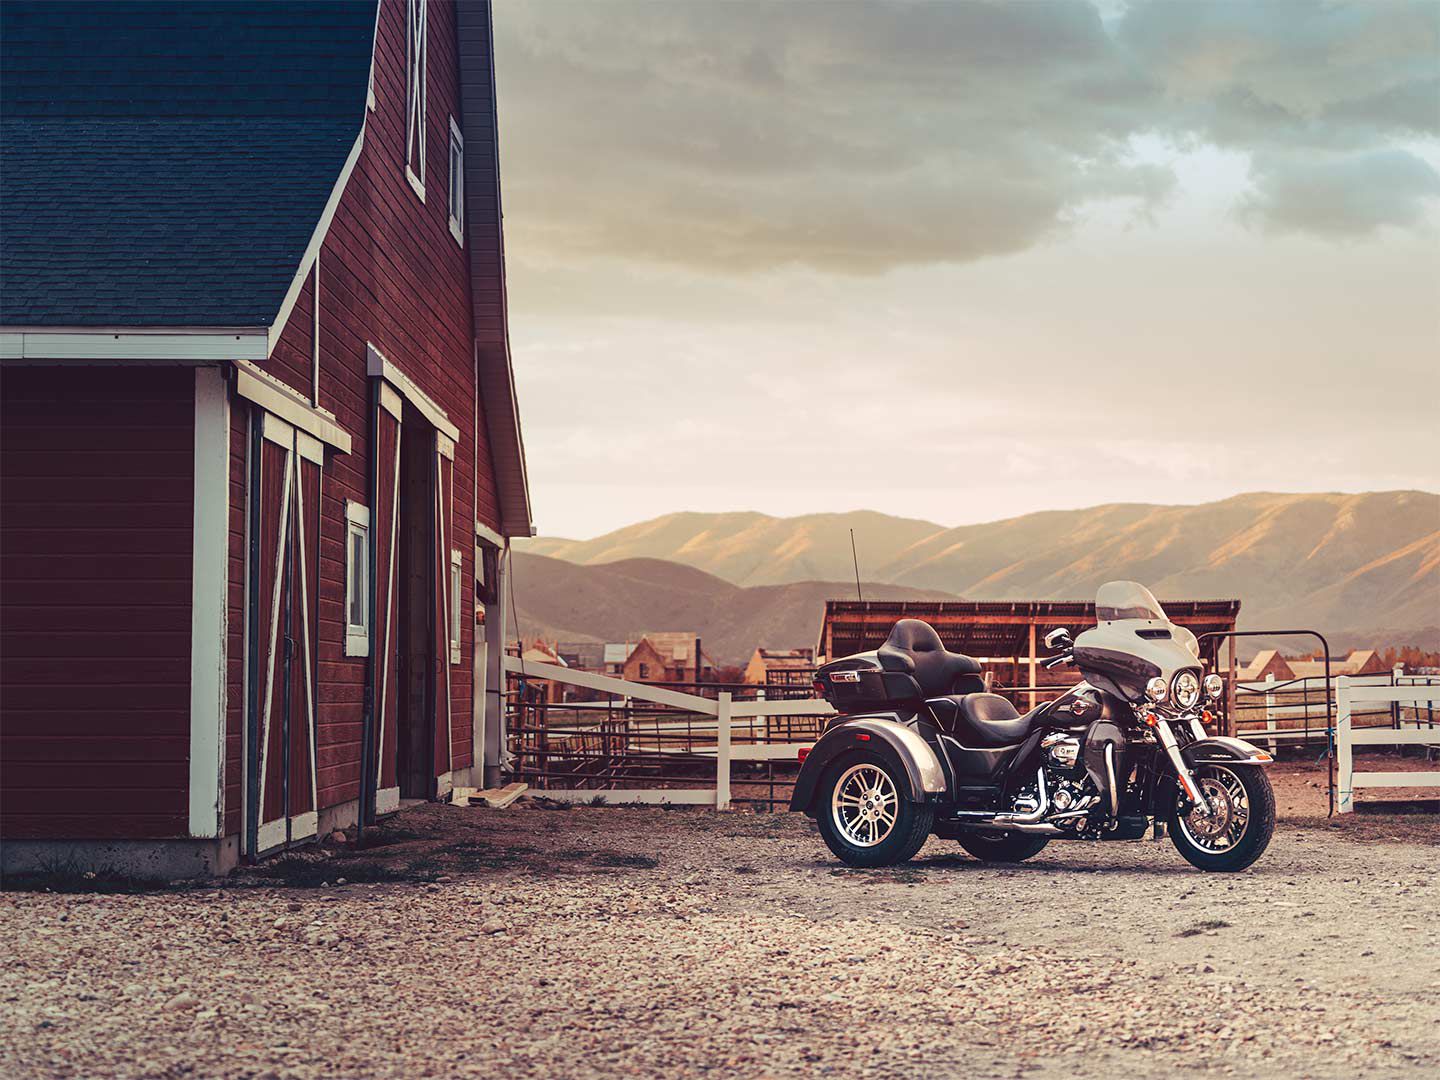 If you don’t have time for back-breaking camping trips, reserve a spot at your favorite campground and pack up the Tri Glide Ultra. Bonus points if you bring a trailer along.